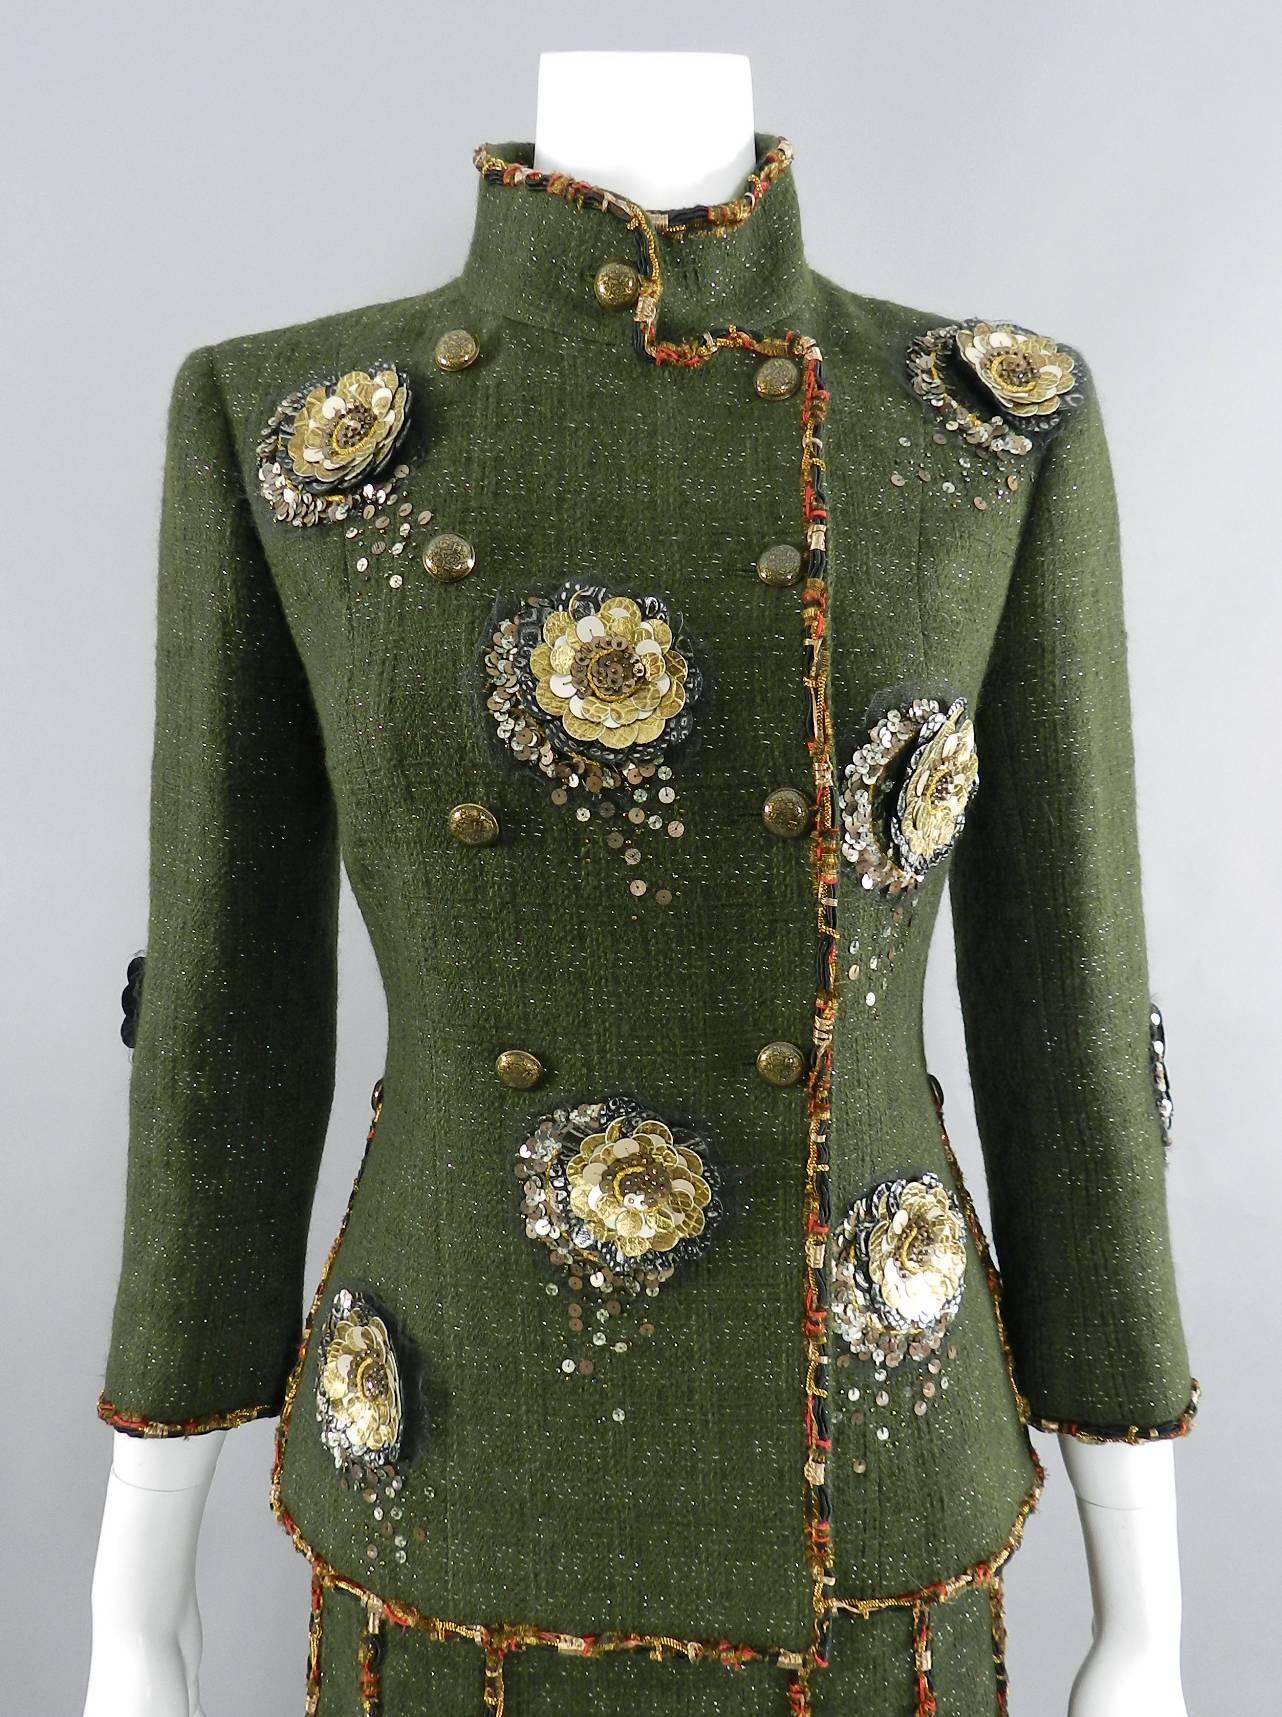 Women's Chanel Pre-Fall 2010 Shanghai Runway Green skirt Suit with Gold Lesage Camelias